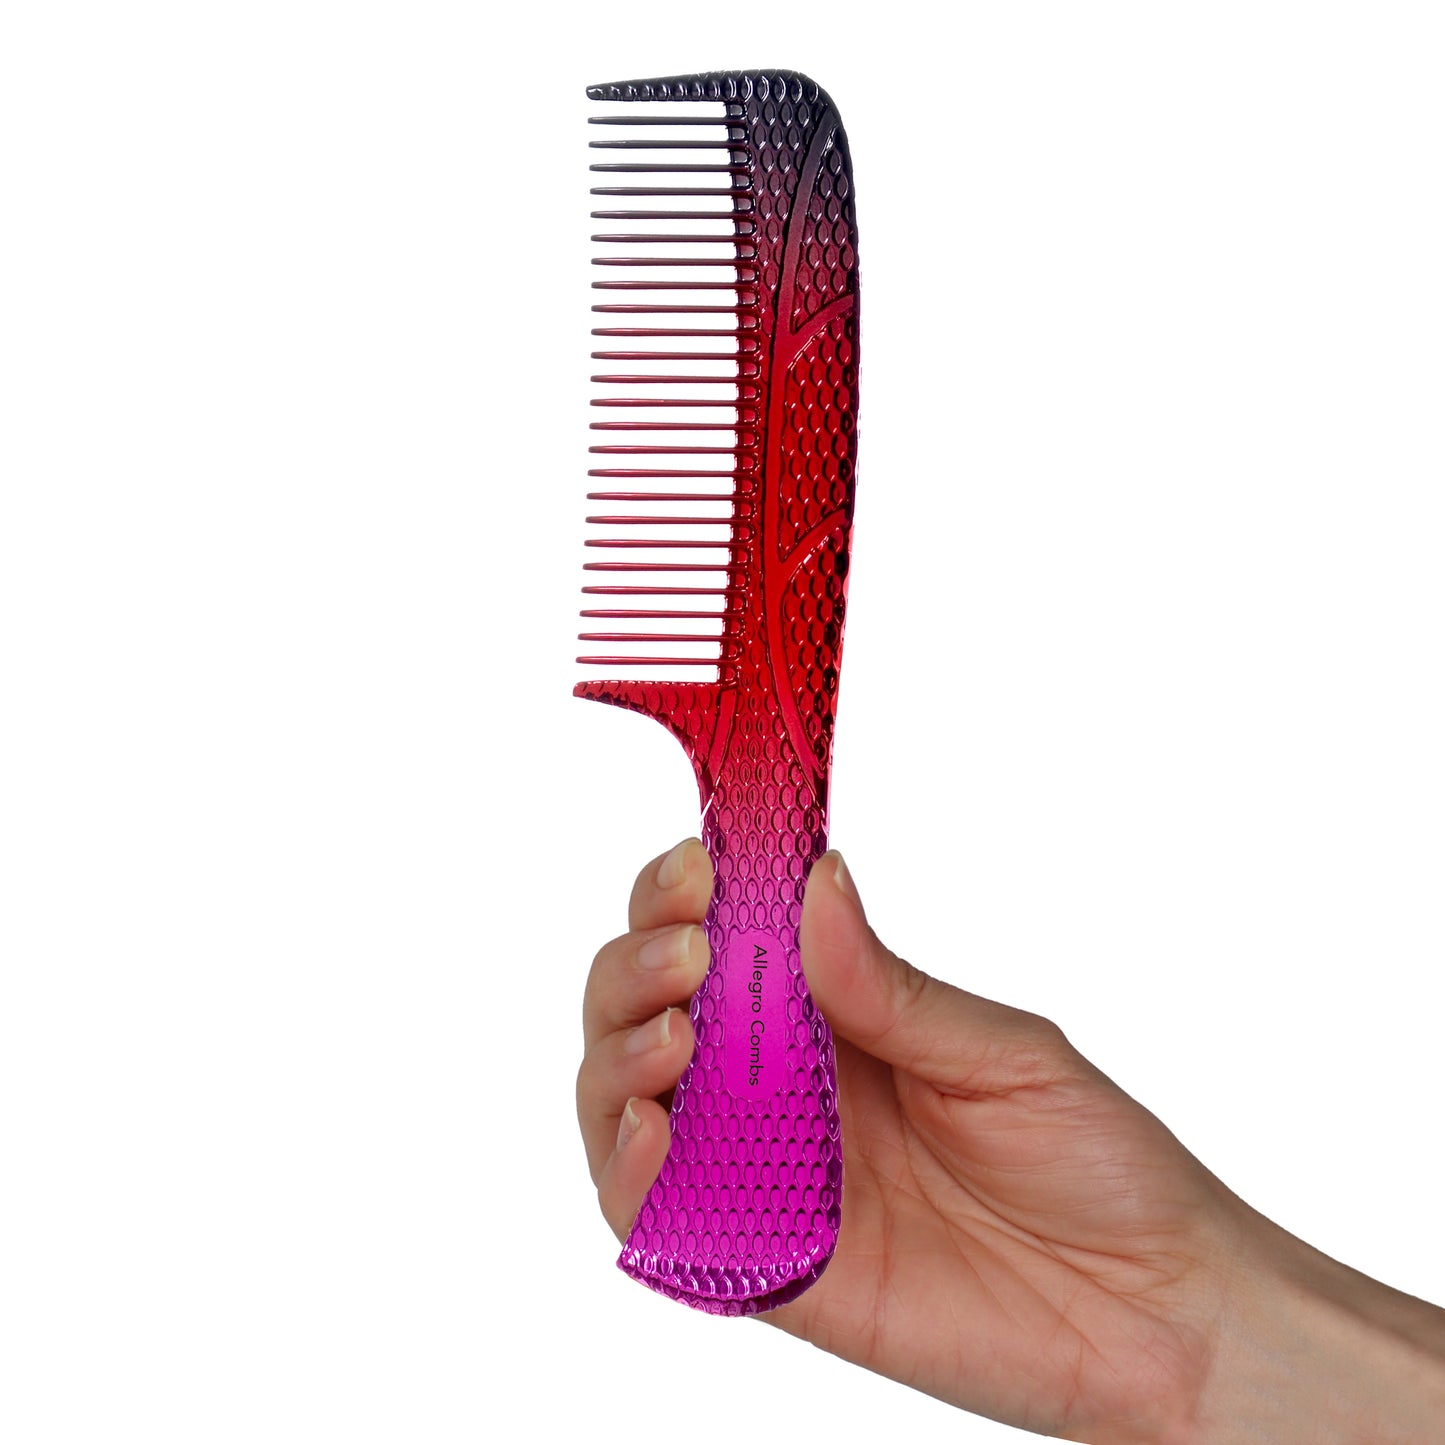 Allegro Comb 1004 Wide Tooth Detangling Hair Combs For Women Texture 1 Count